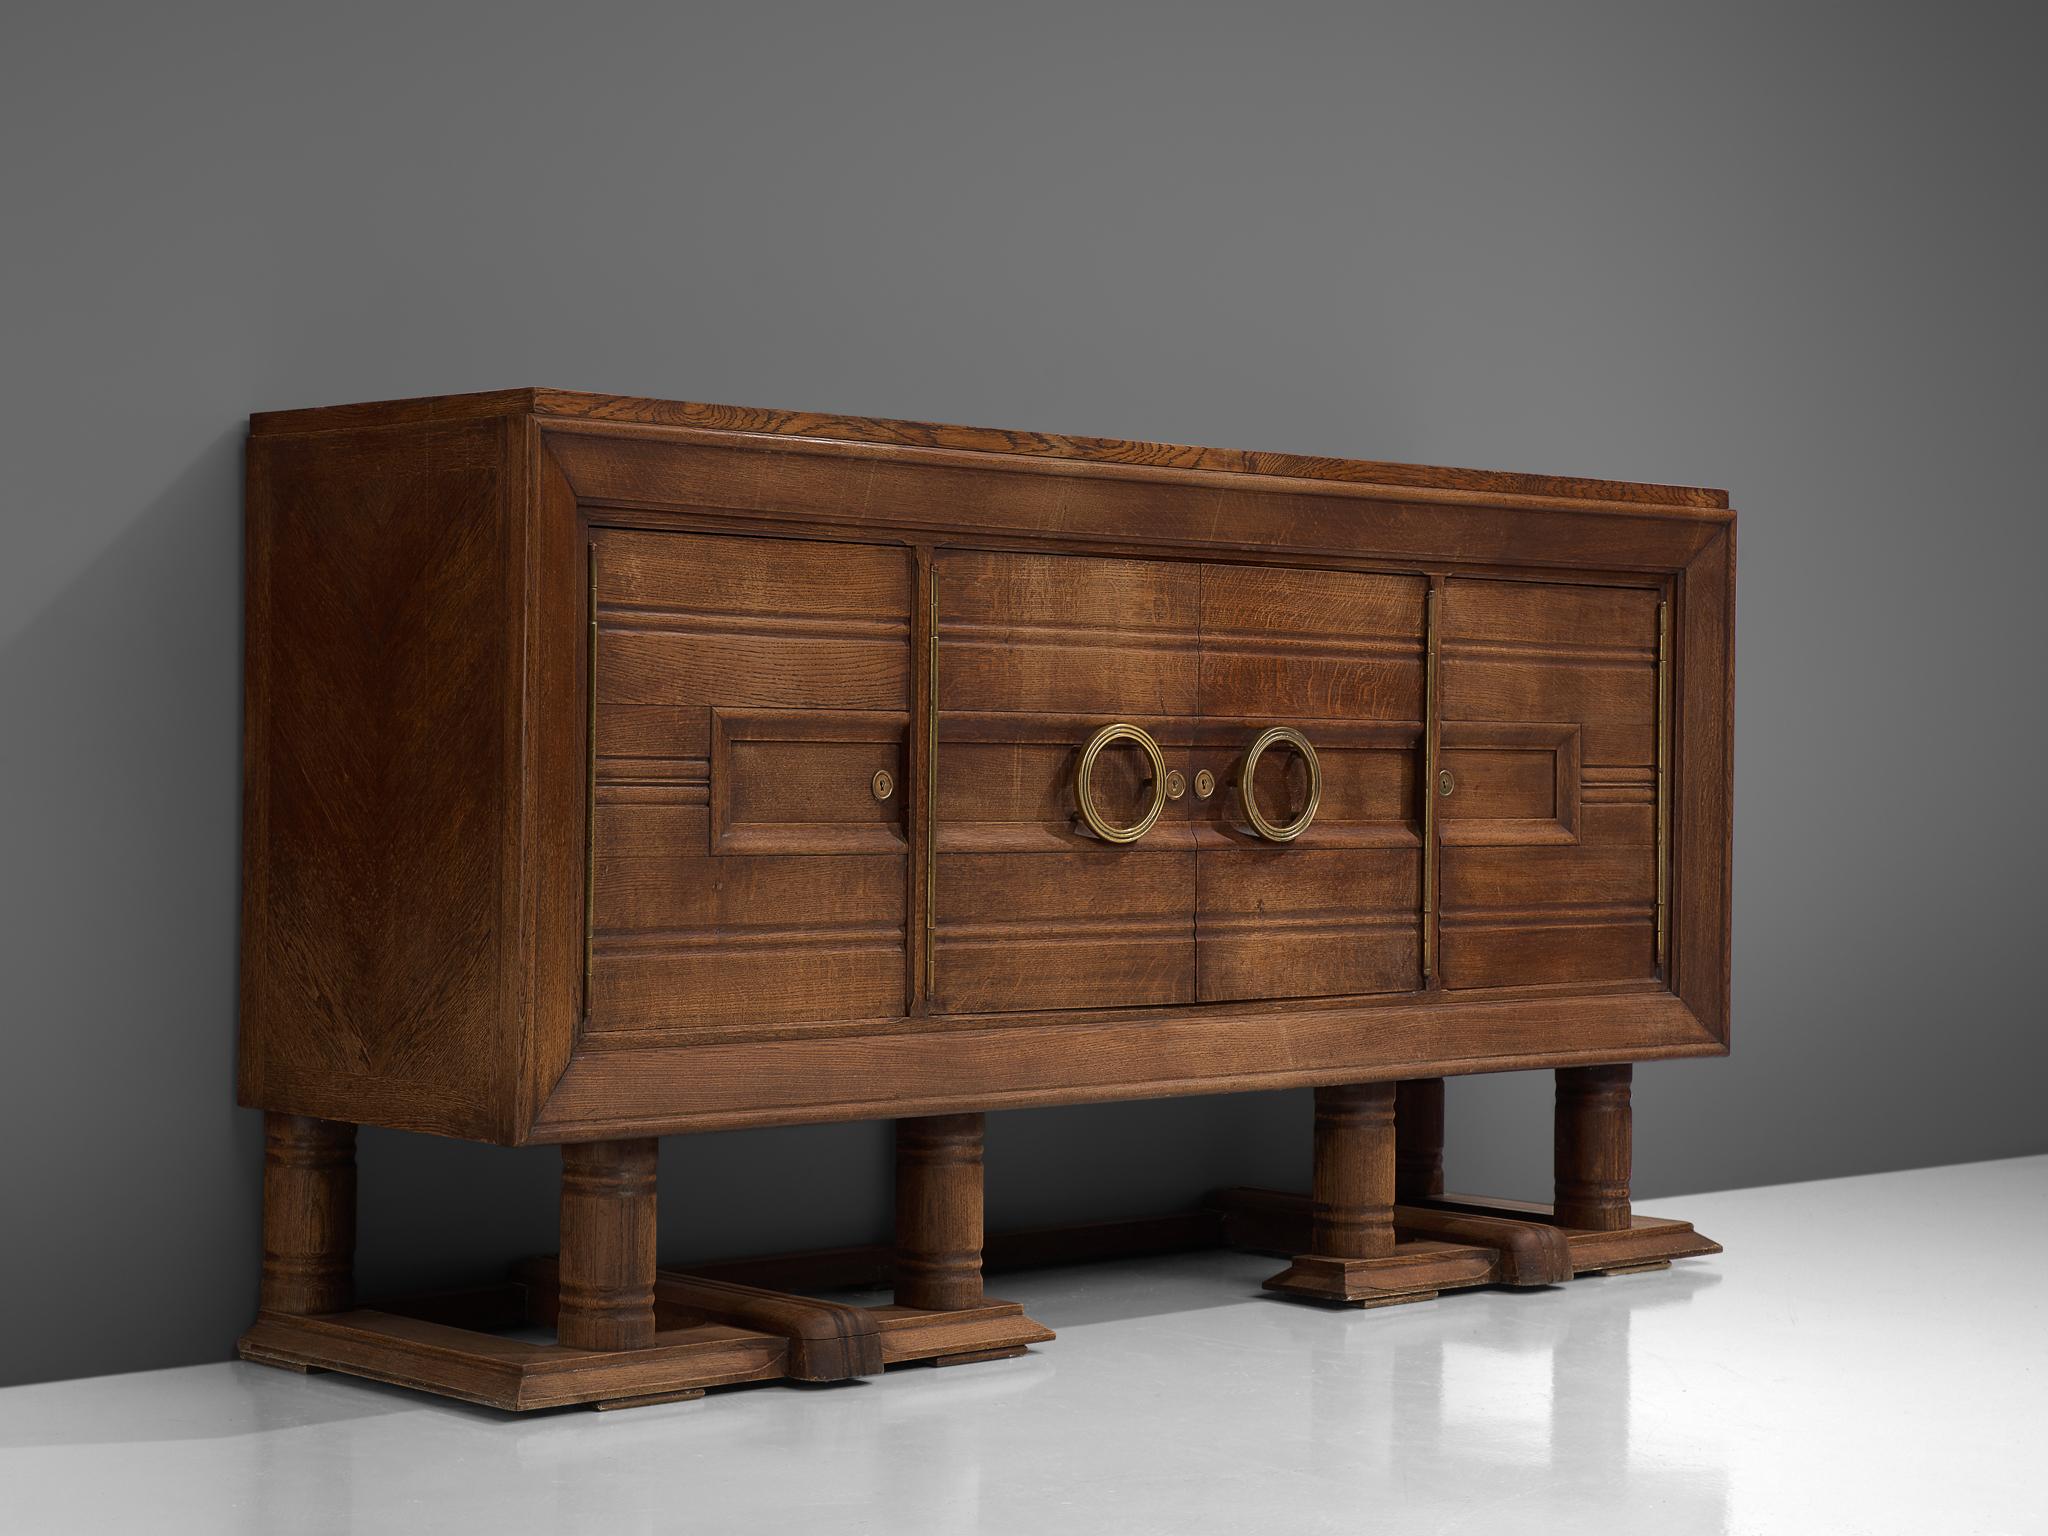 Credenza, oak and brass, France, 1940s.

Large Art Deco sideboard in solid oak with elegant brass details. A well designed piece that is crafted with beautiful elements, for instance geometric engraved front. The sideboard contains plenty of